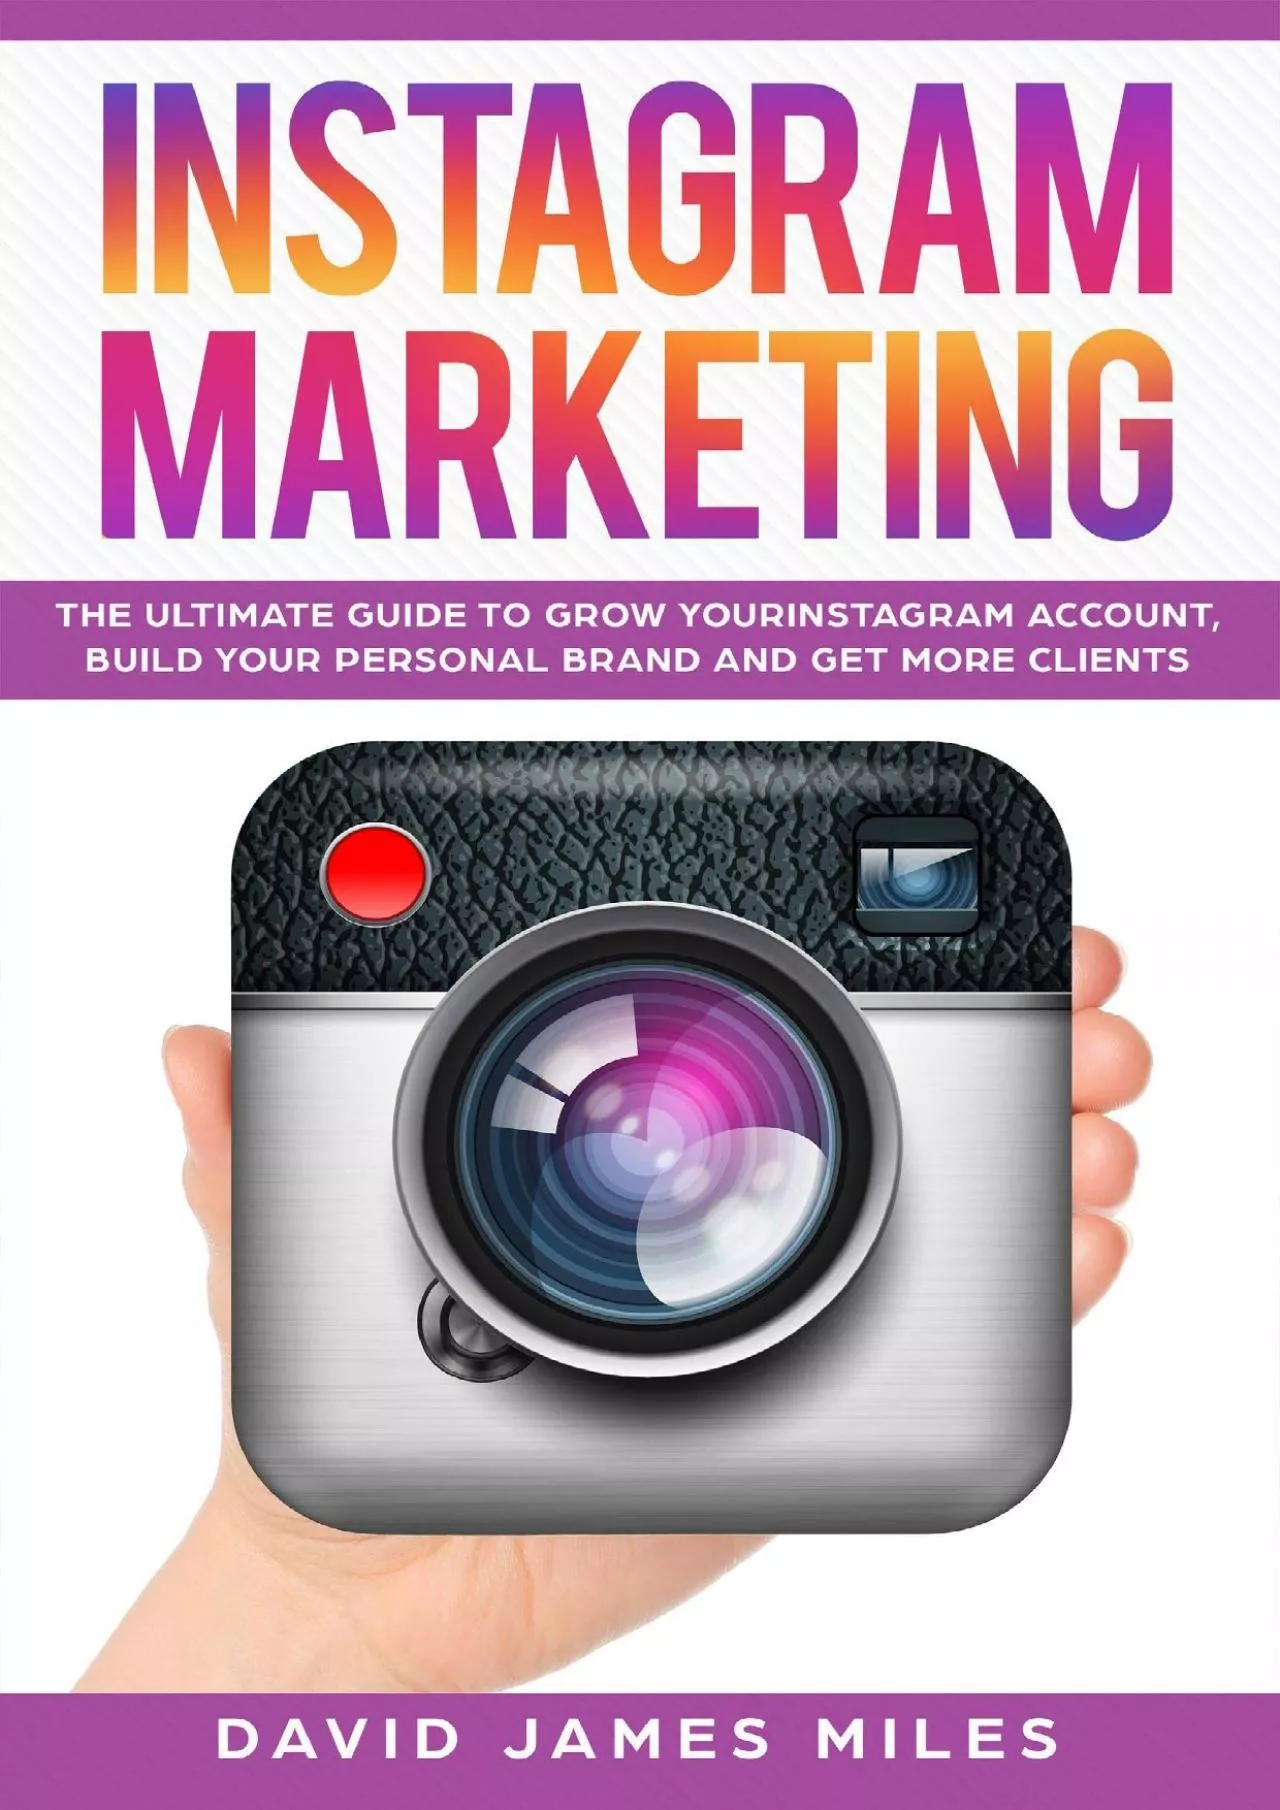 Instagram Marketing: The Ultimate Guide to Grow Your Instagram Account, Build Your Personal